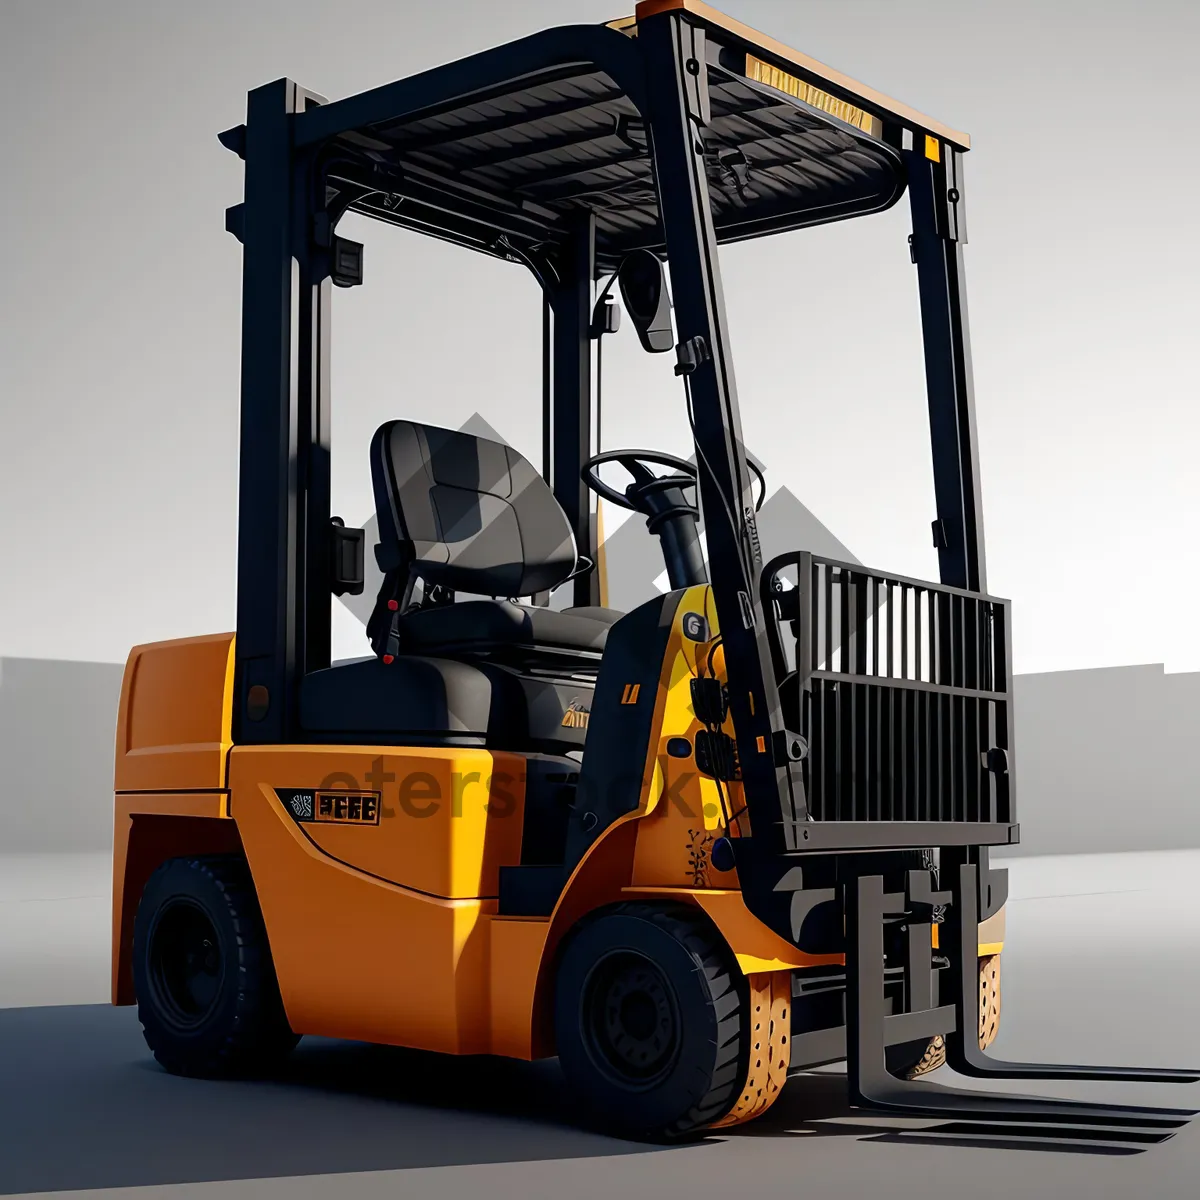 Picture of Heavy-duty Forklift Truck in Industrial Warehouse